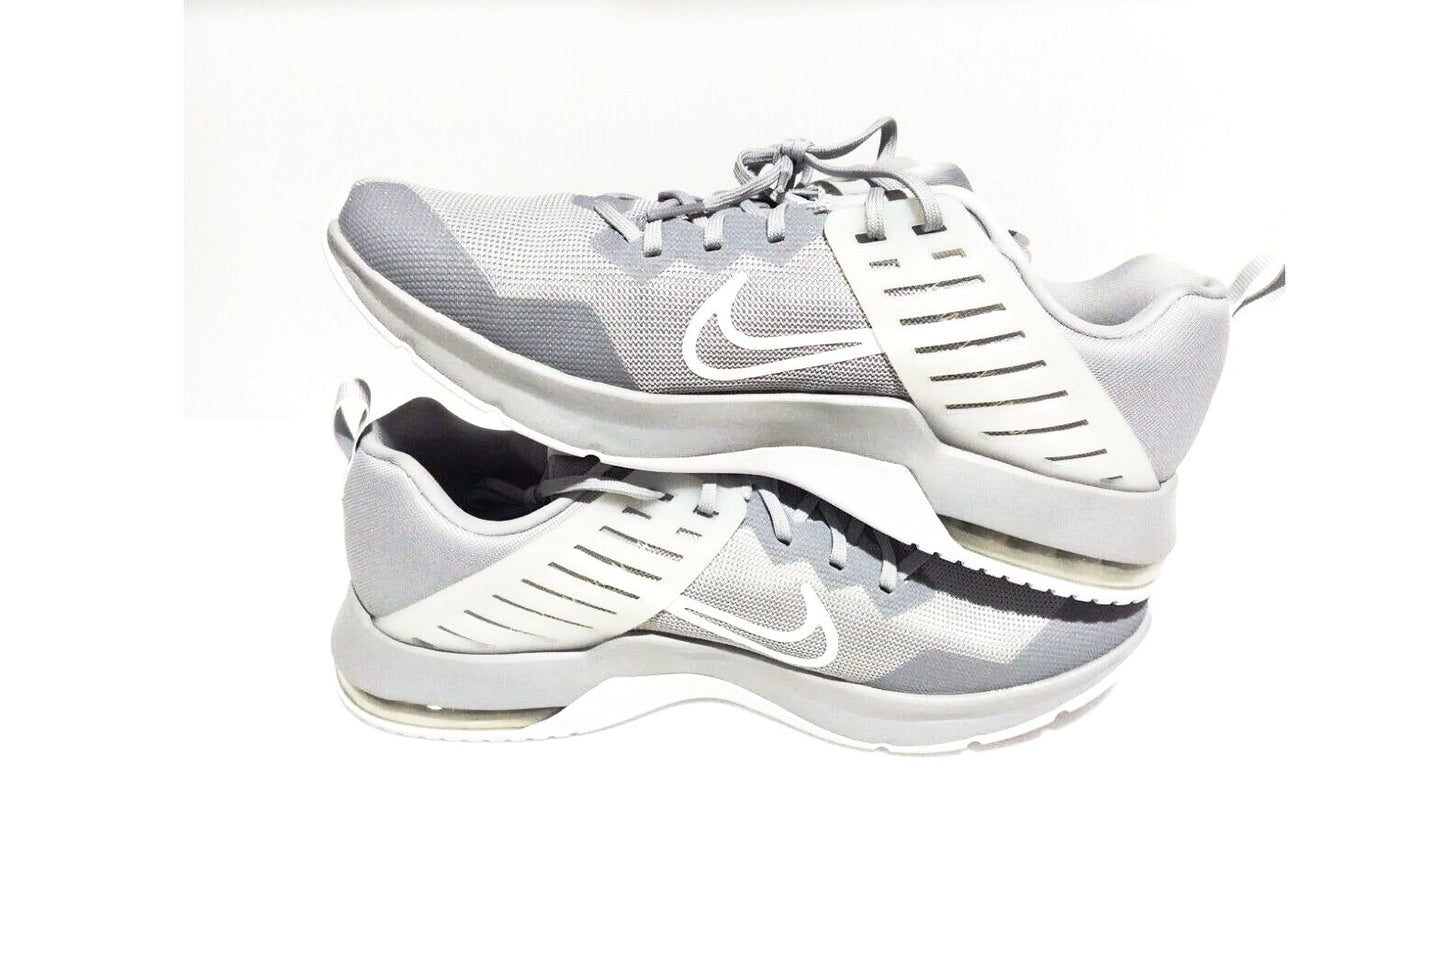 Nike air max alpha trainer 3 grey training shoes size 14 us men